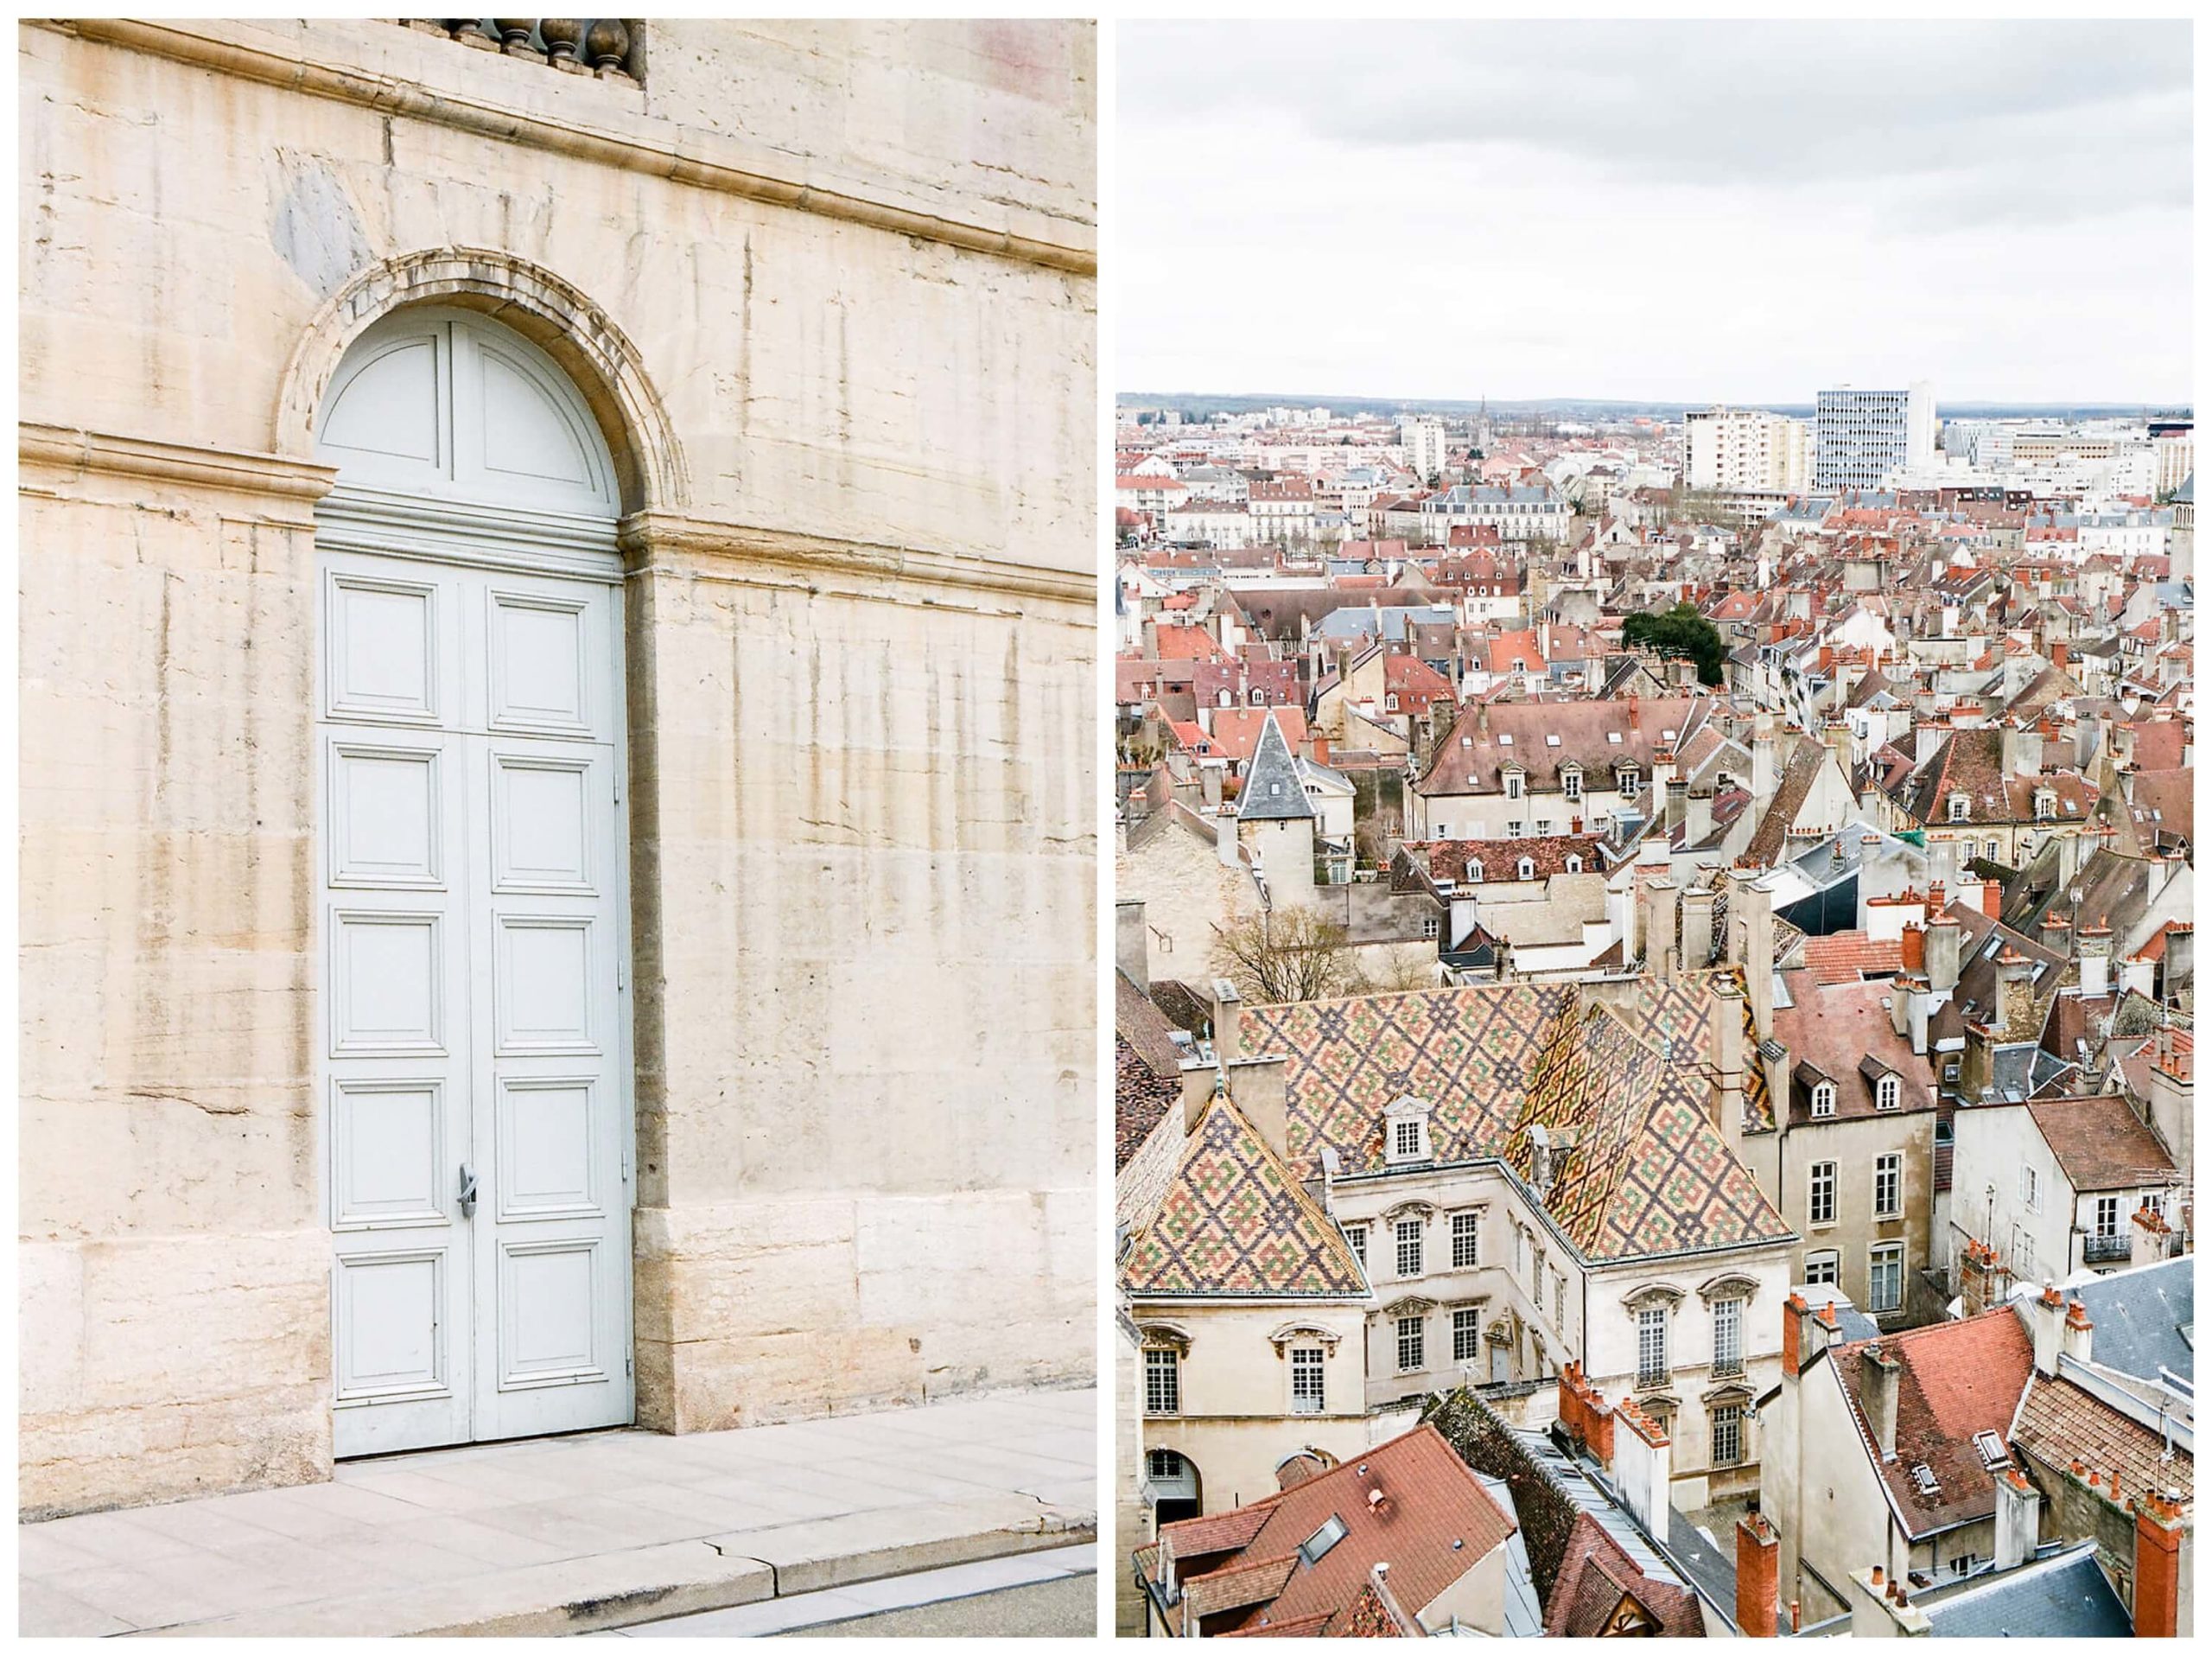 left: beautiful blue door of the palais des ducs, the palace of the dukes of burgundy in dijon, france right: tiled rooftops in dijon in their famous colors of gold, green, and red